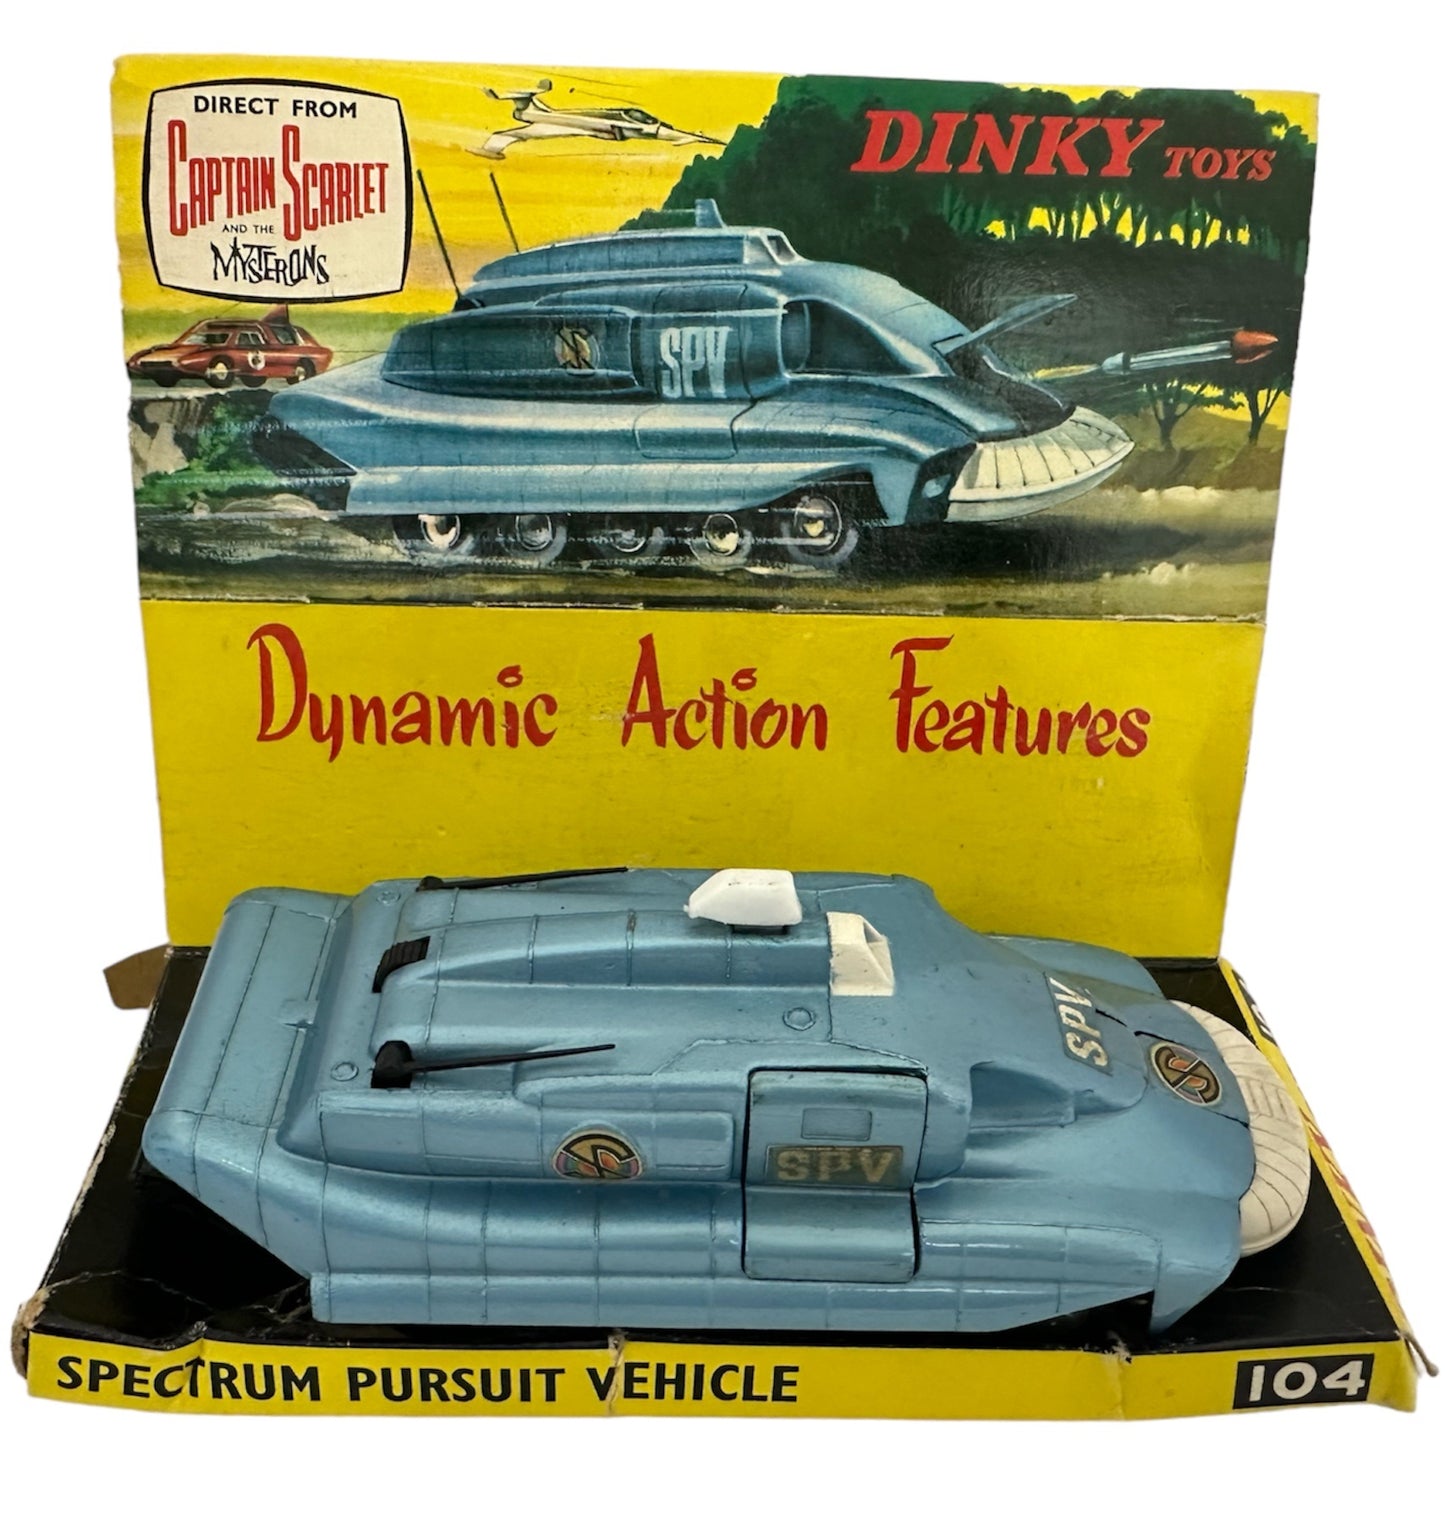 Vintage Dinky Toys 1970 Gerry Andersons Captain Scarlet And The Mysterons SPV Spectrum Pursuit Vehicle Diecast Model No. 104 - Fantastic Condition In The Original Box With Original Display Plinth